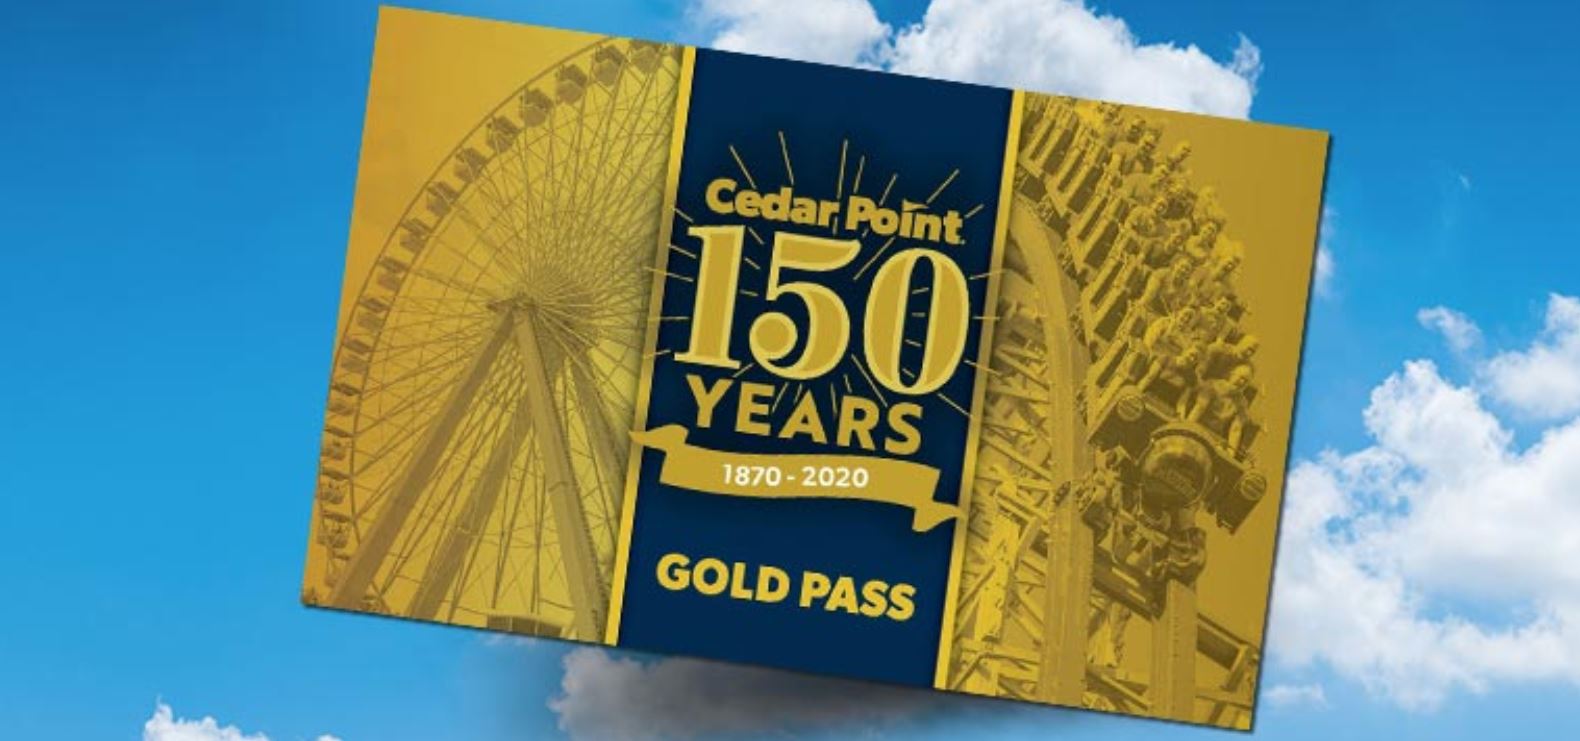 99 Cedar Point Gold Pass Everything You Need To Know!